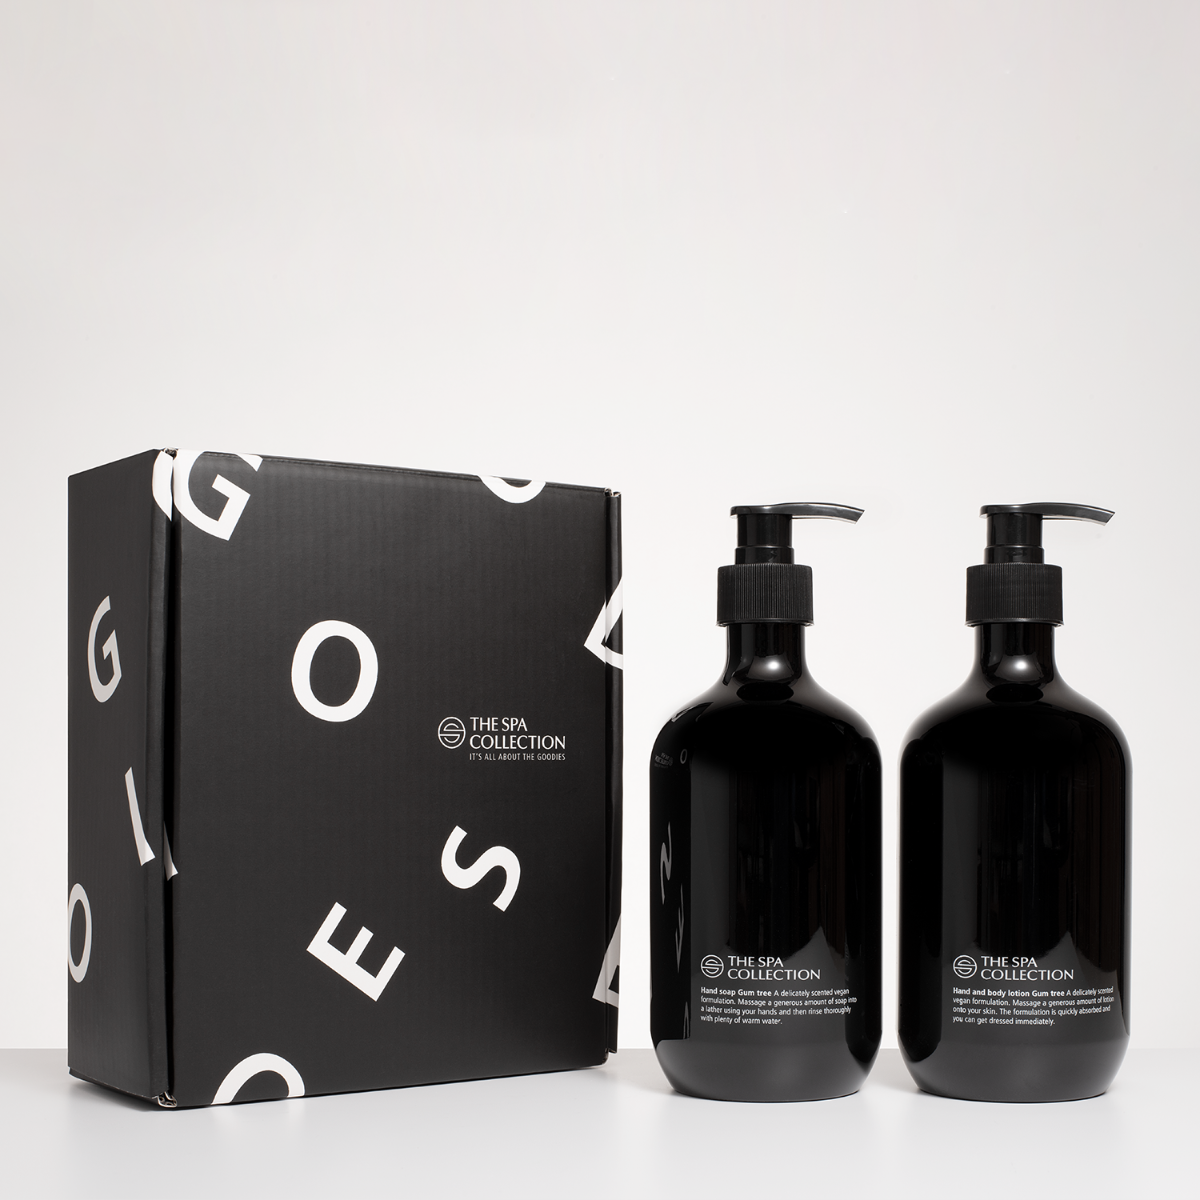 Gift set - The Spa Collection Gum Tree 475ml